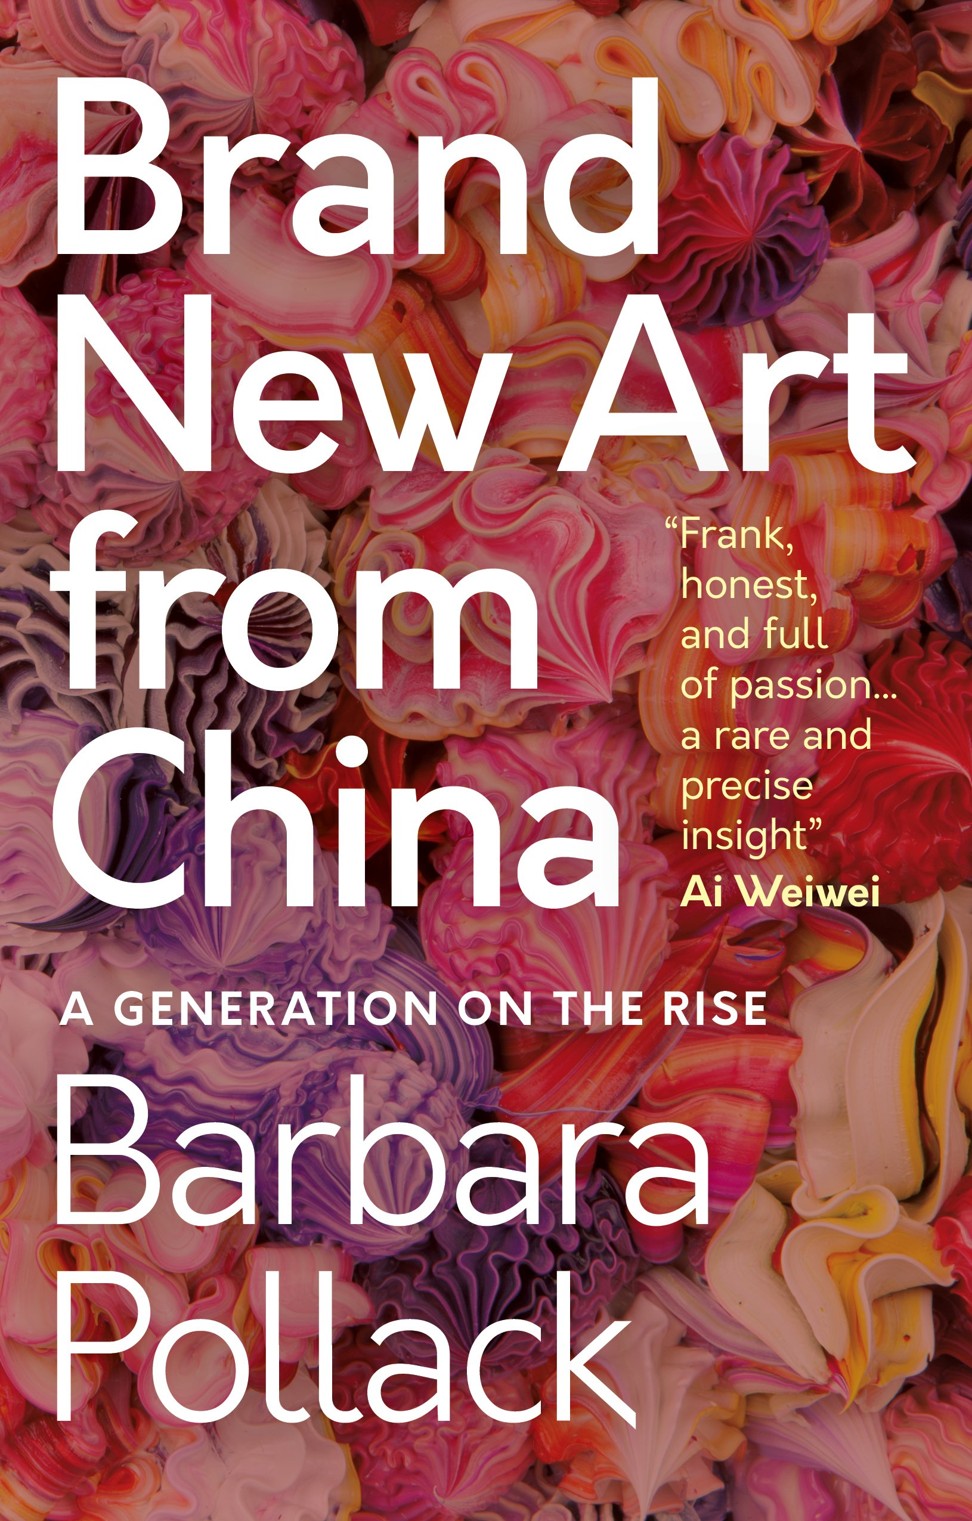 Brand New Art From China by Barbara Pollack.